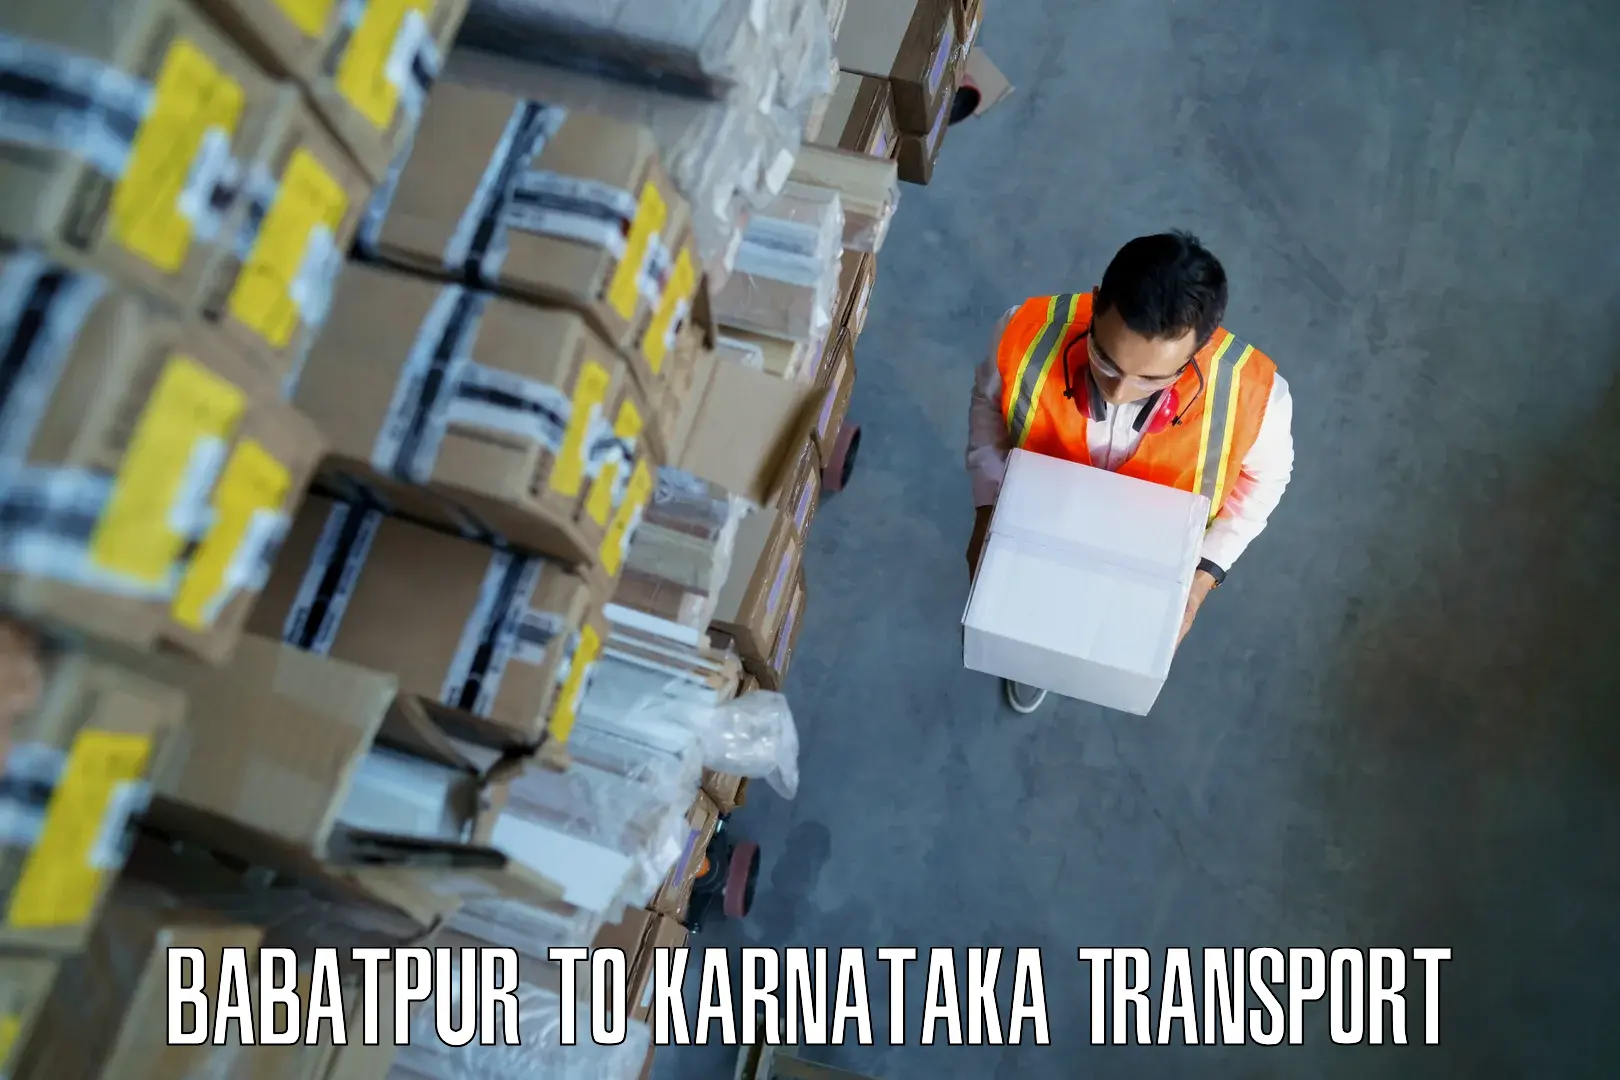 Truck transport companies in India Babatpur to Manipal Academy of Higher Education